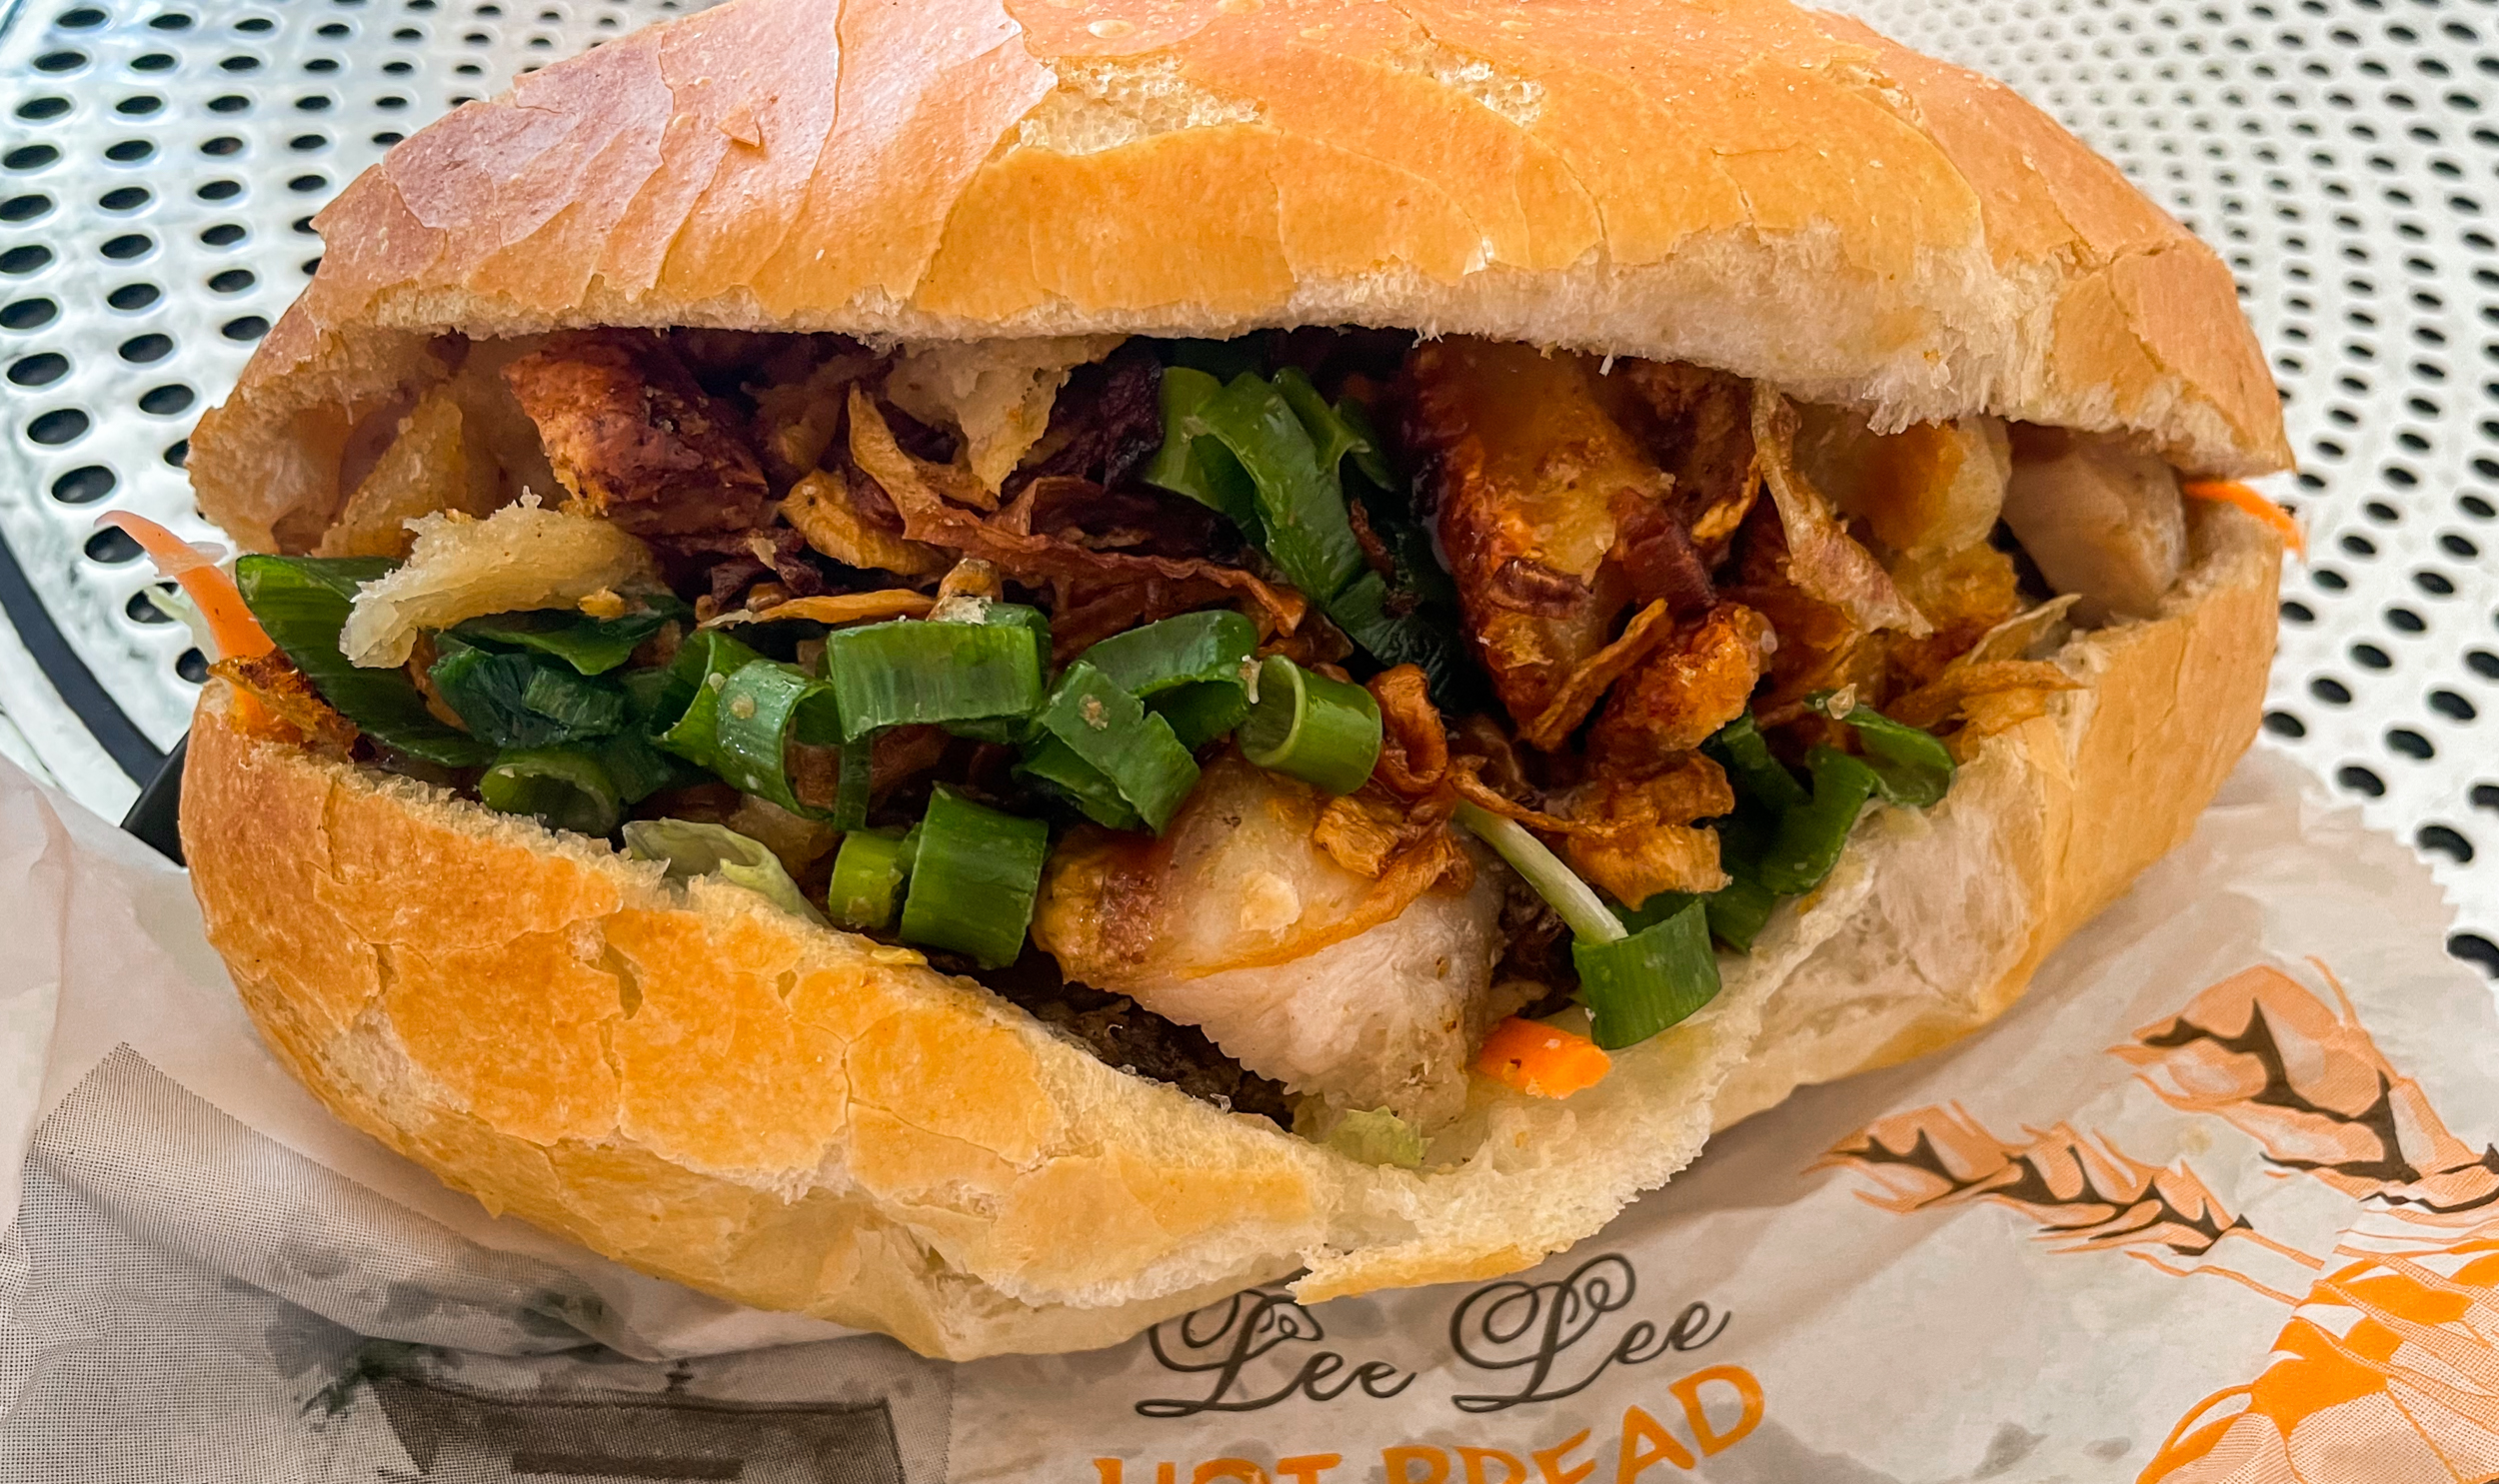 Banh mi bread roll with pork, spring onion, and other fillings inside. Sitting on paper bag with Lee Lee Hot Bread printed on it